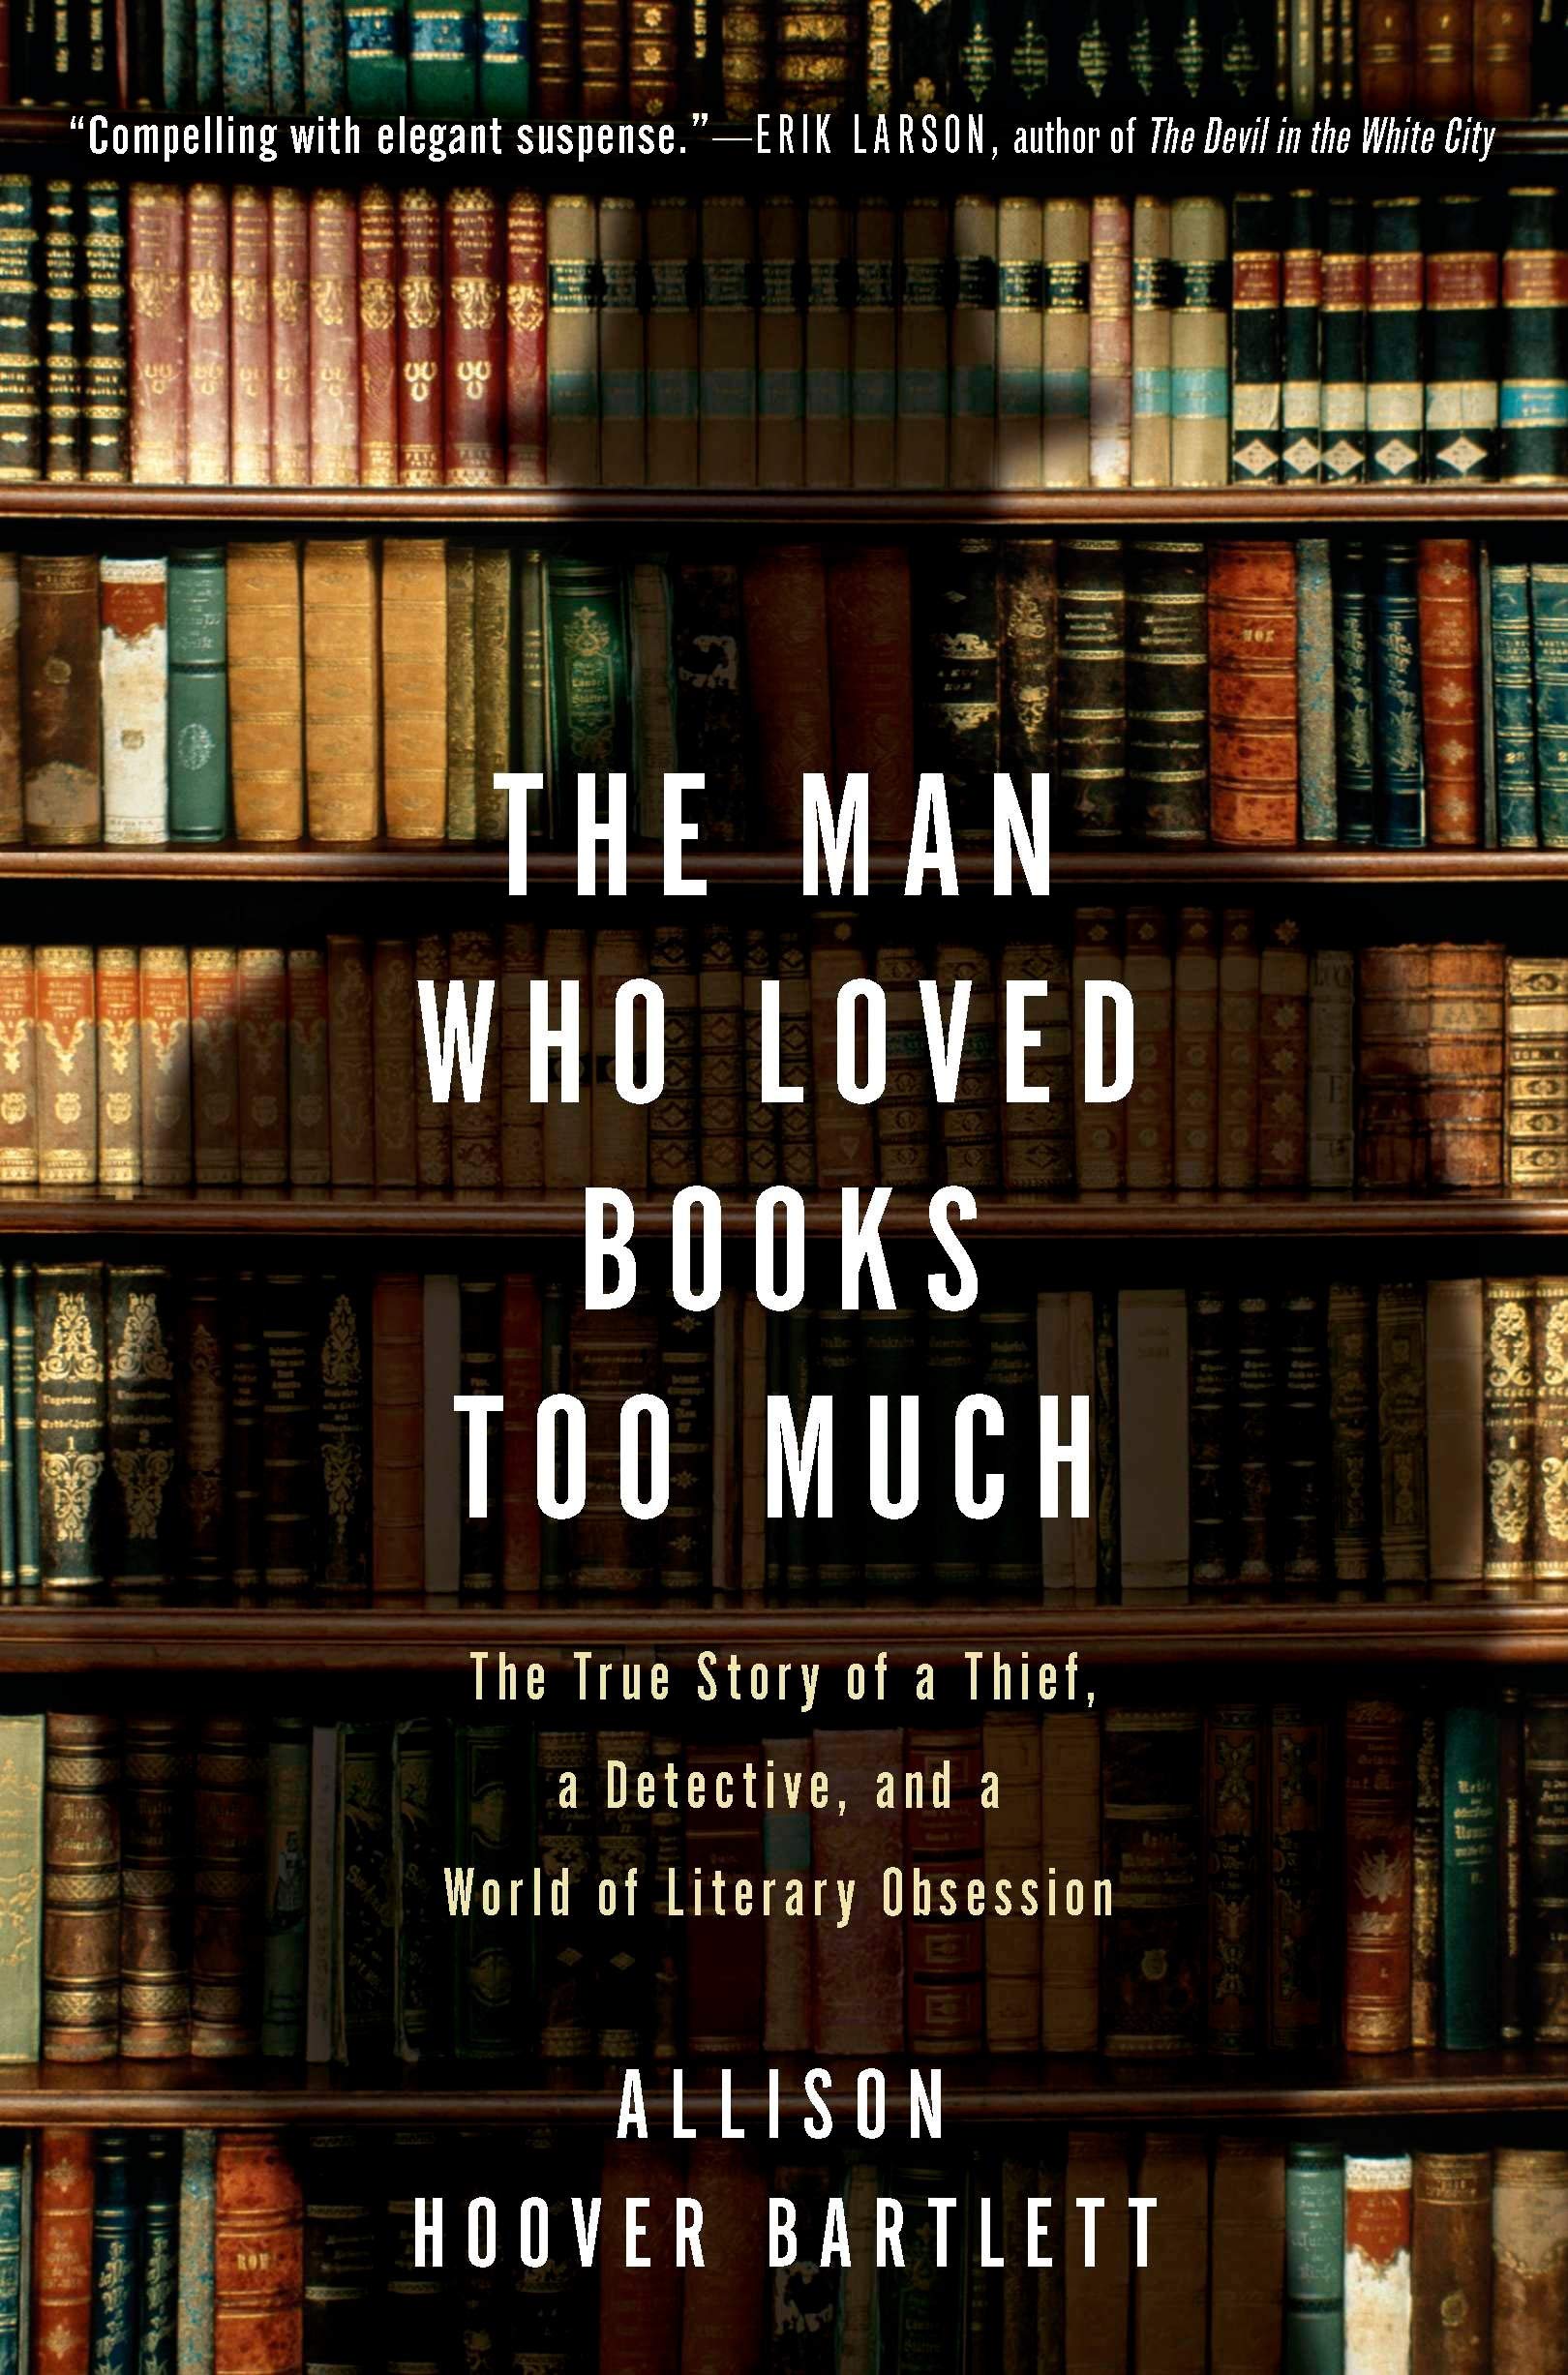 The Man Who Loved Books Too Much : The True Story of a Thief, a Detective, and a World of Literary Obsession by Allison Hoover Bartlett